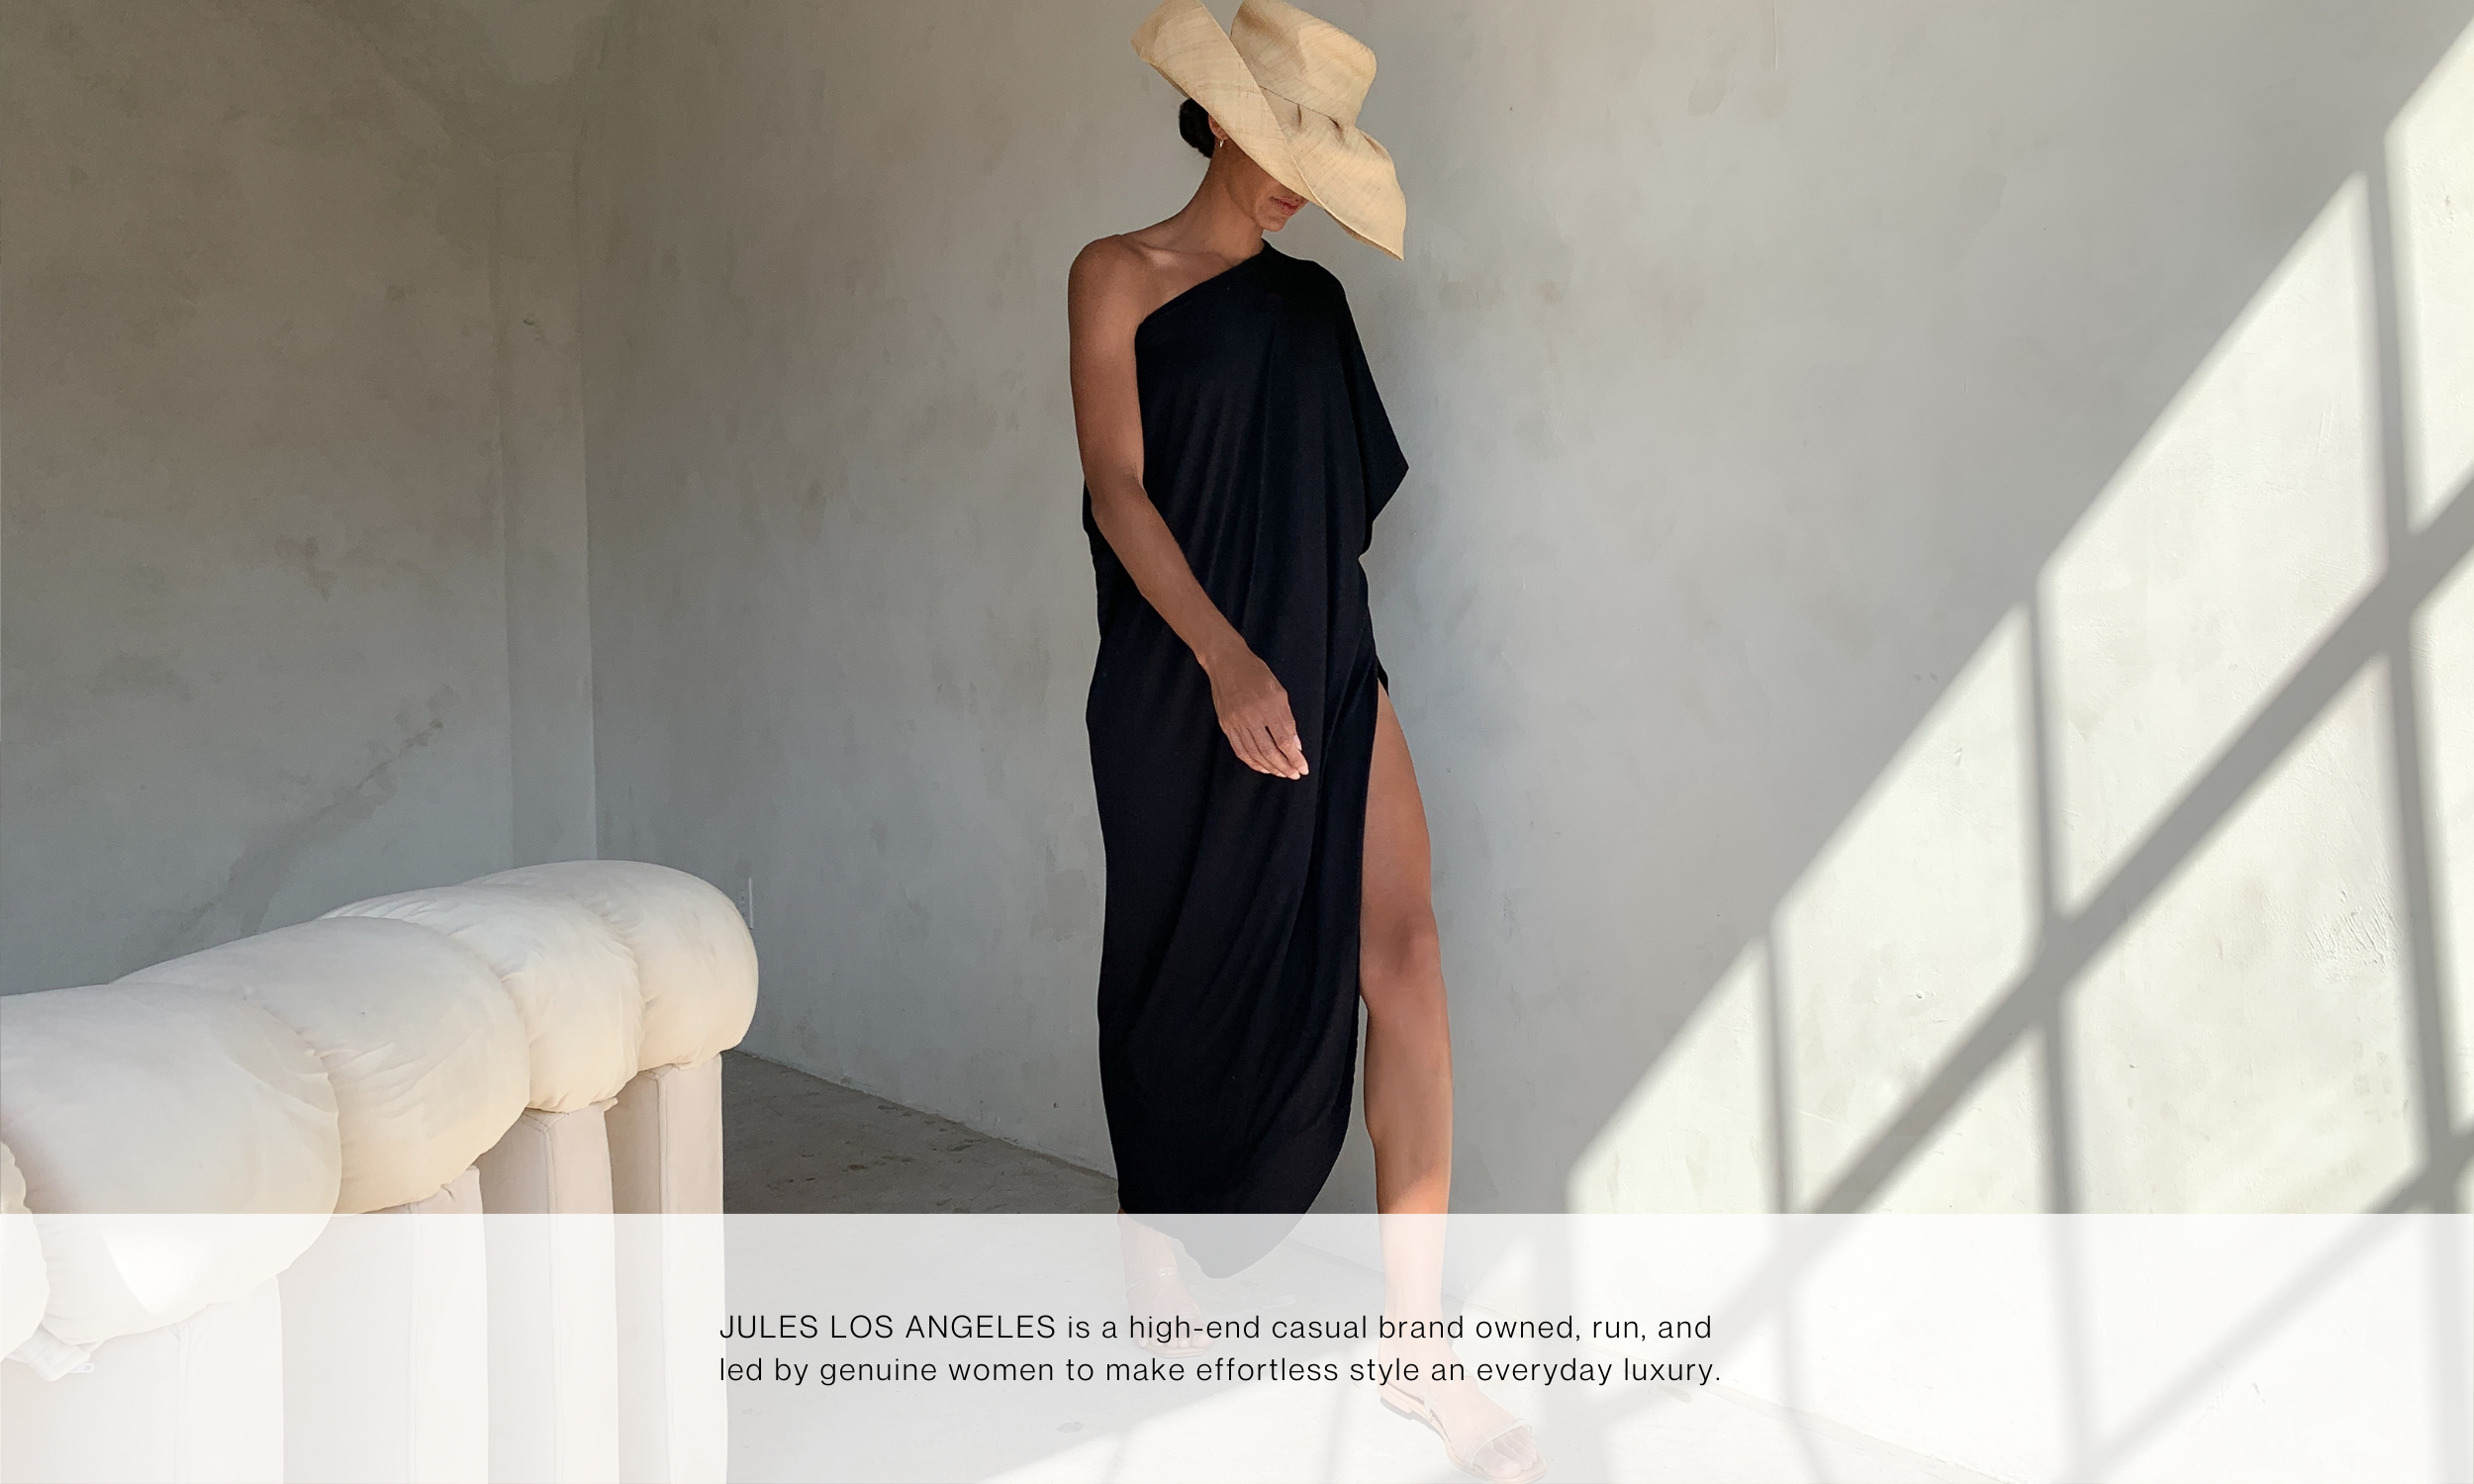 Jules Los Angeles is a high-end casual brand owned, run, and led by genuine women to make effortless style an everyday luxury